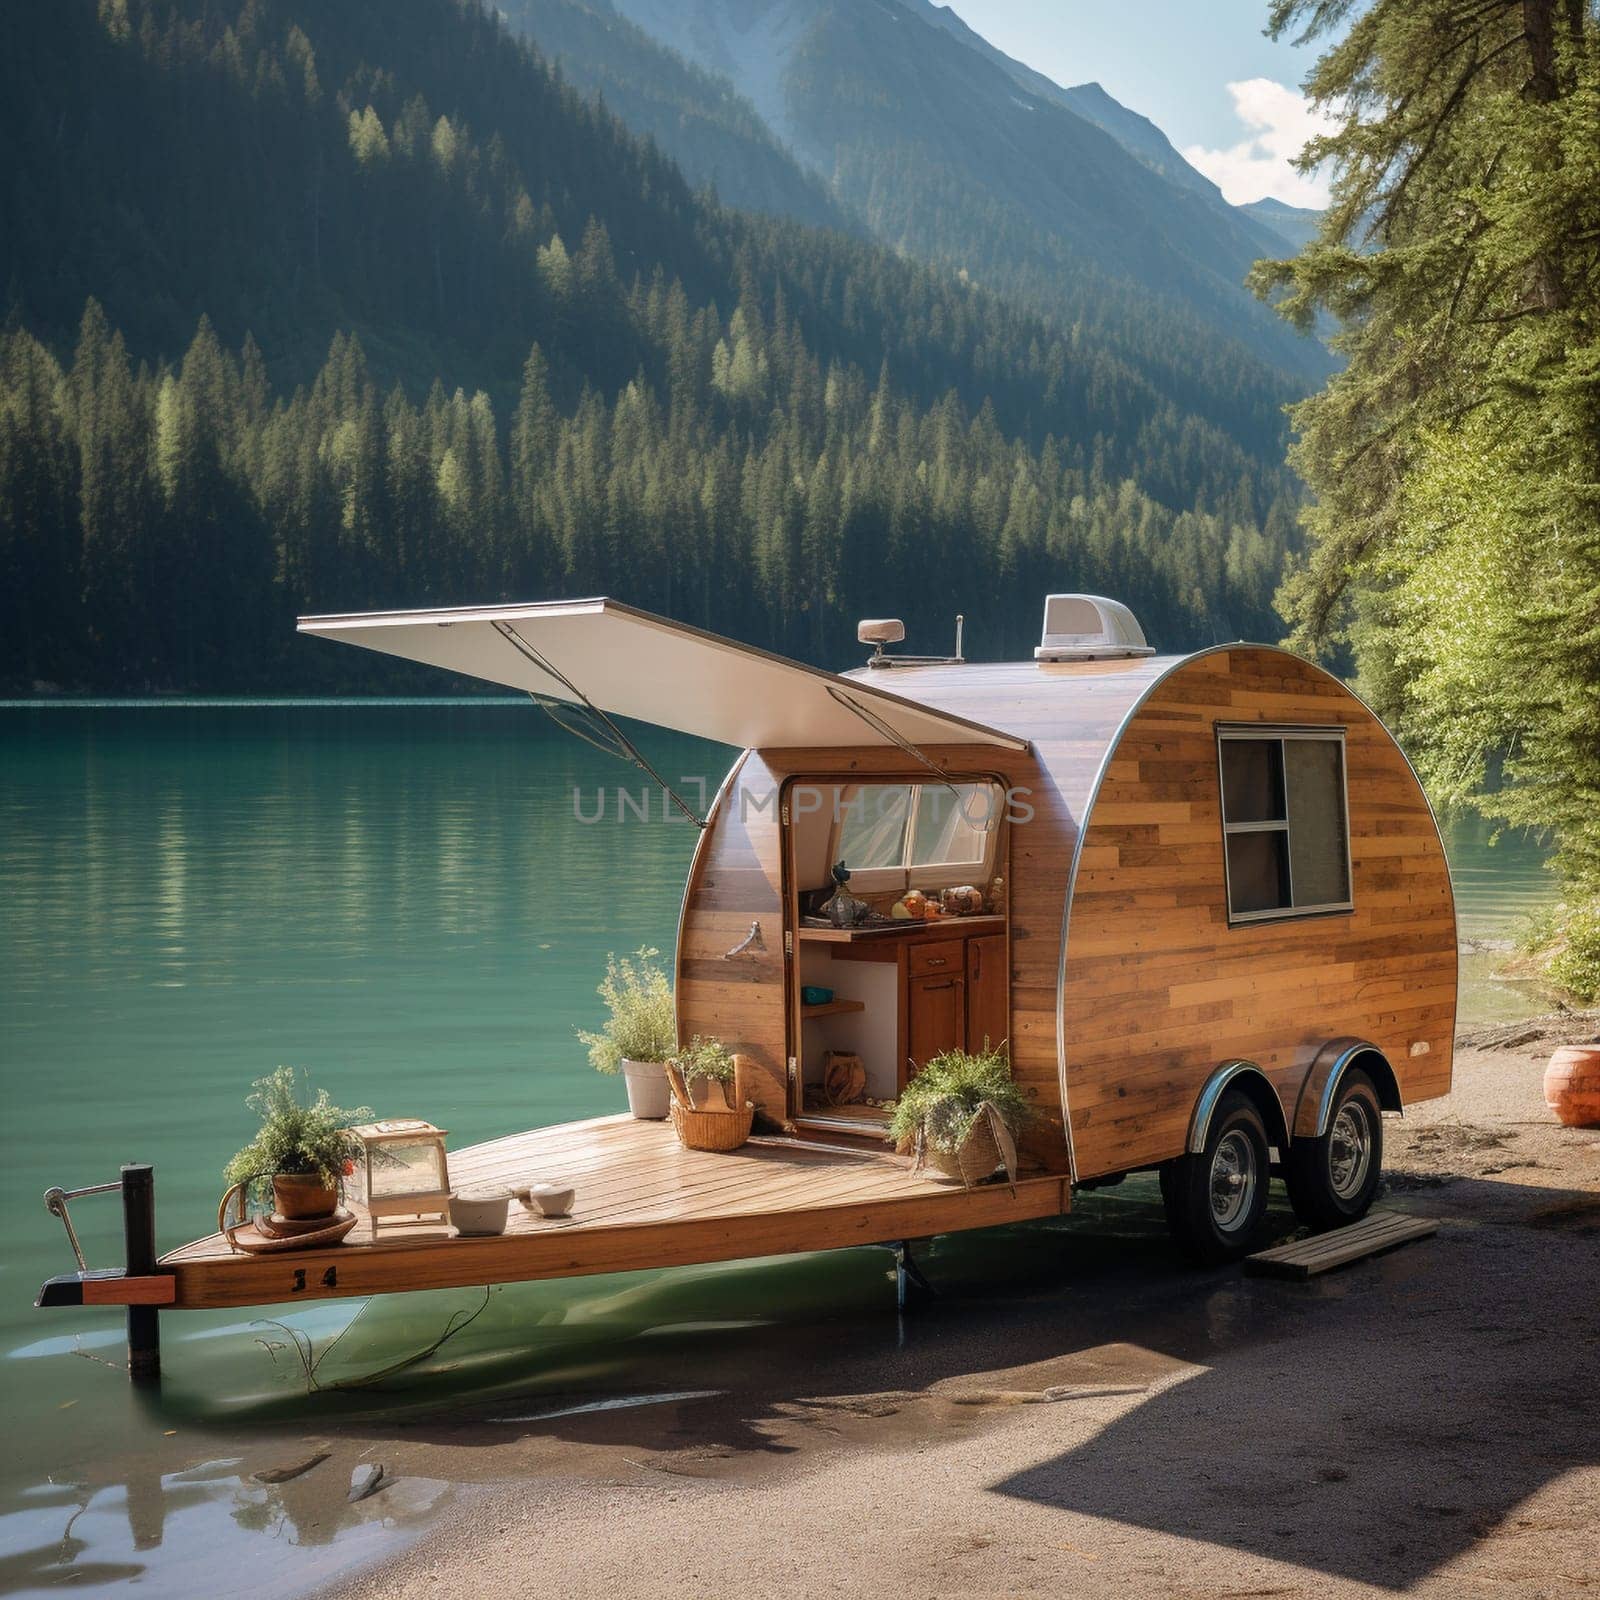 Camper Trailer Parked on the Edge of a Serene Mountain Lake with Snow-Capped Peaks View by Sahin